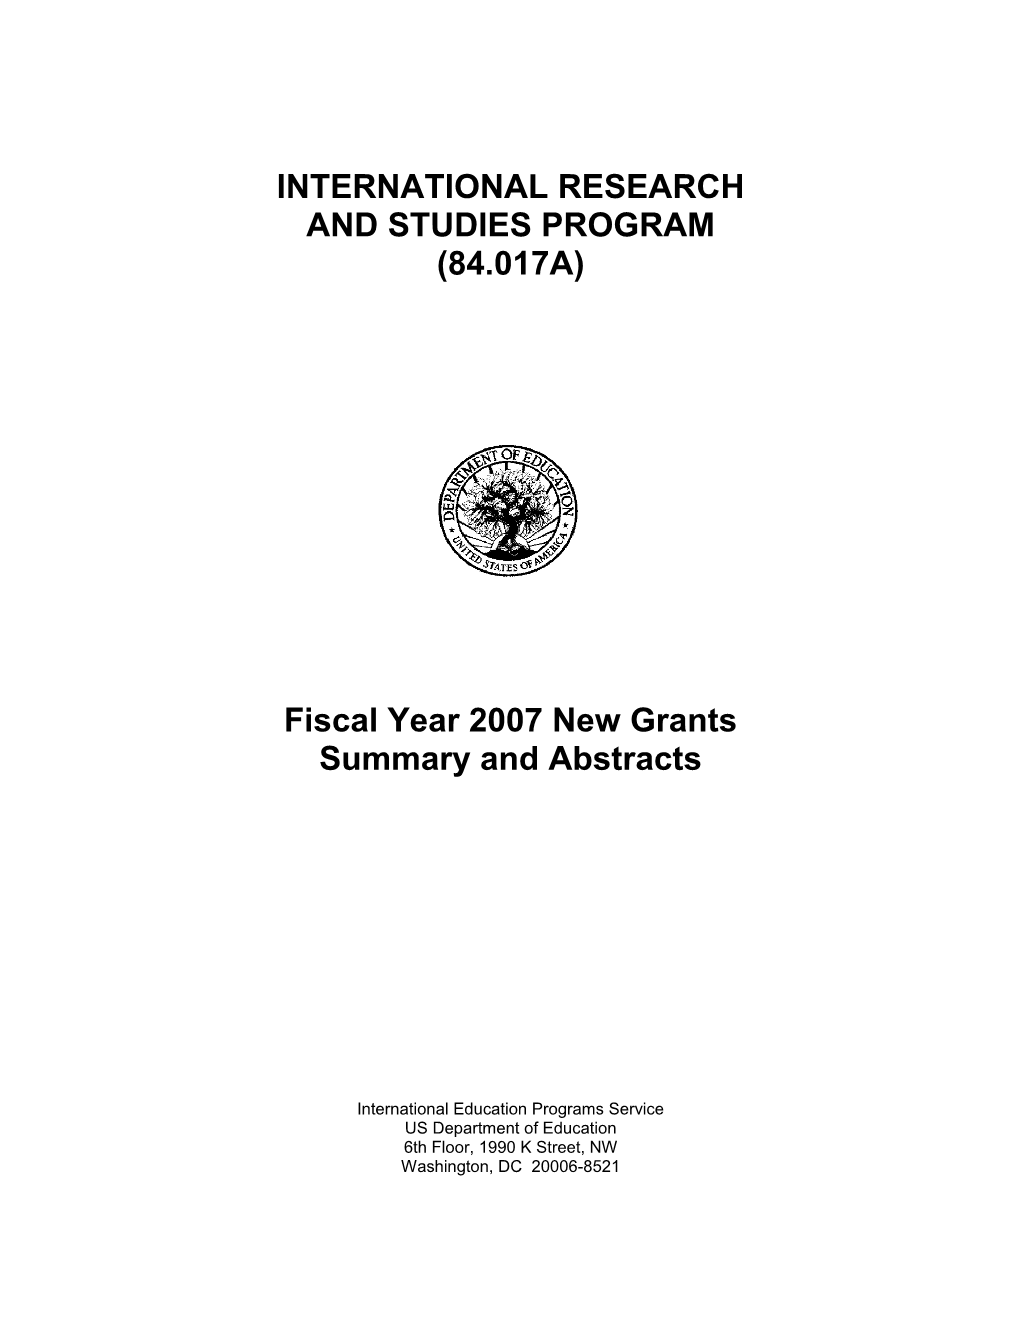 International Research and Studies Program FY 2007 Abstracts (MS Word)